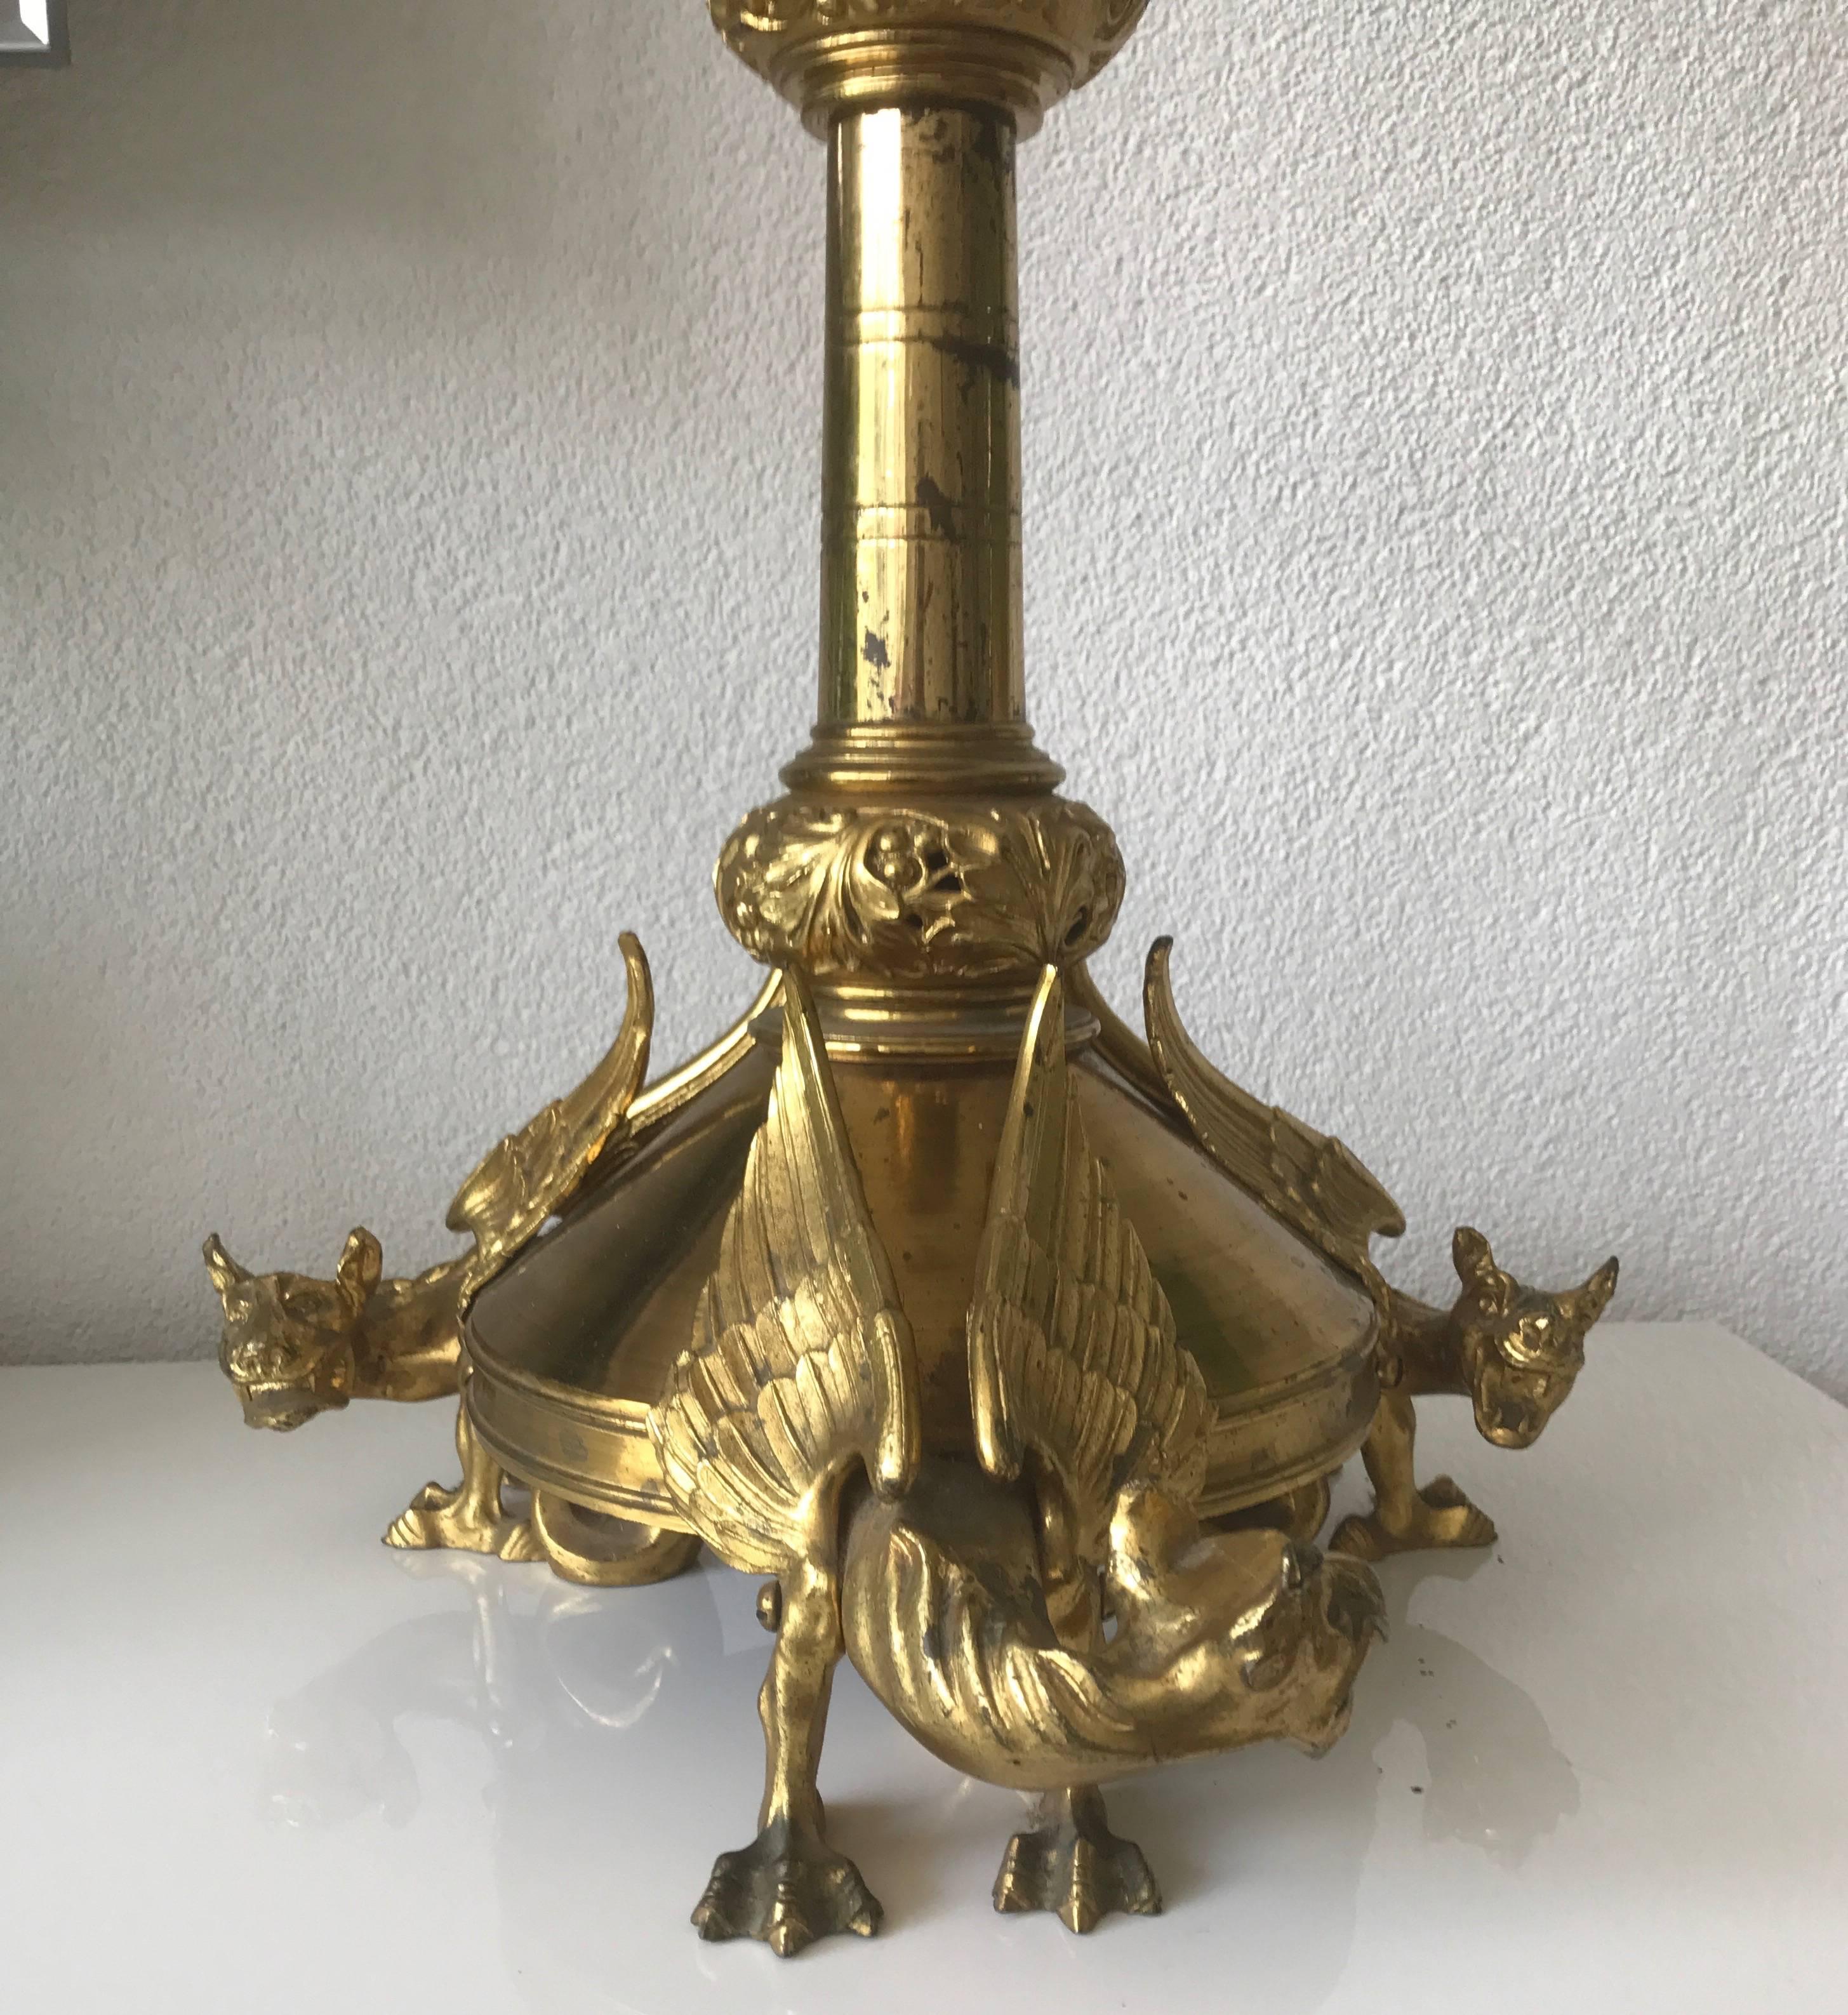 Stunning 19th century bronze and brass church altar candle holder.

This rare and decorative Gothic Style candlestick is both a joy to look at and practical to use. This altar piece has a tripod base of sculpted, gilt bronze chimeras. These winged,